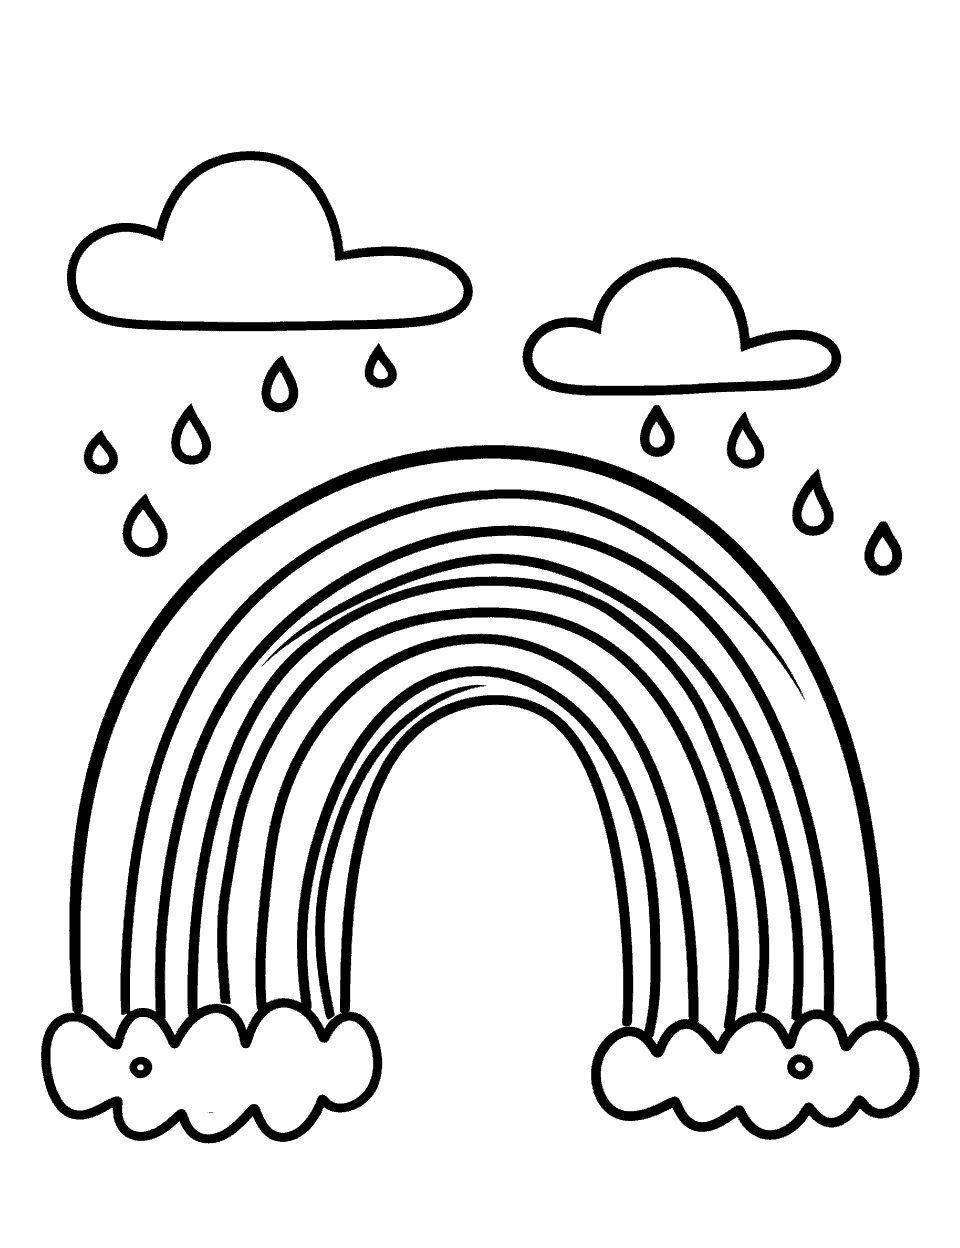 Rainbow After Rain Coloring Page - A simple rainbow forms after the rain.